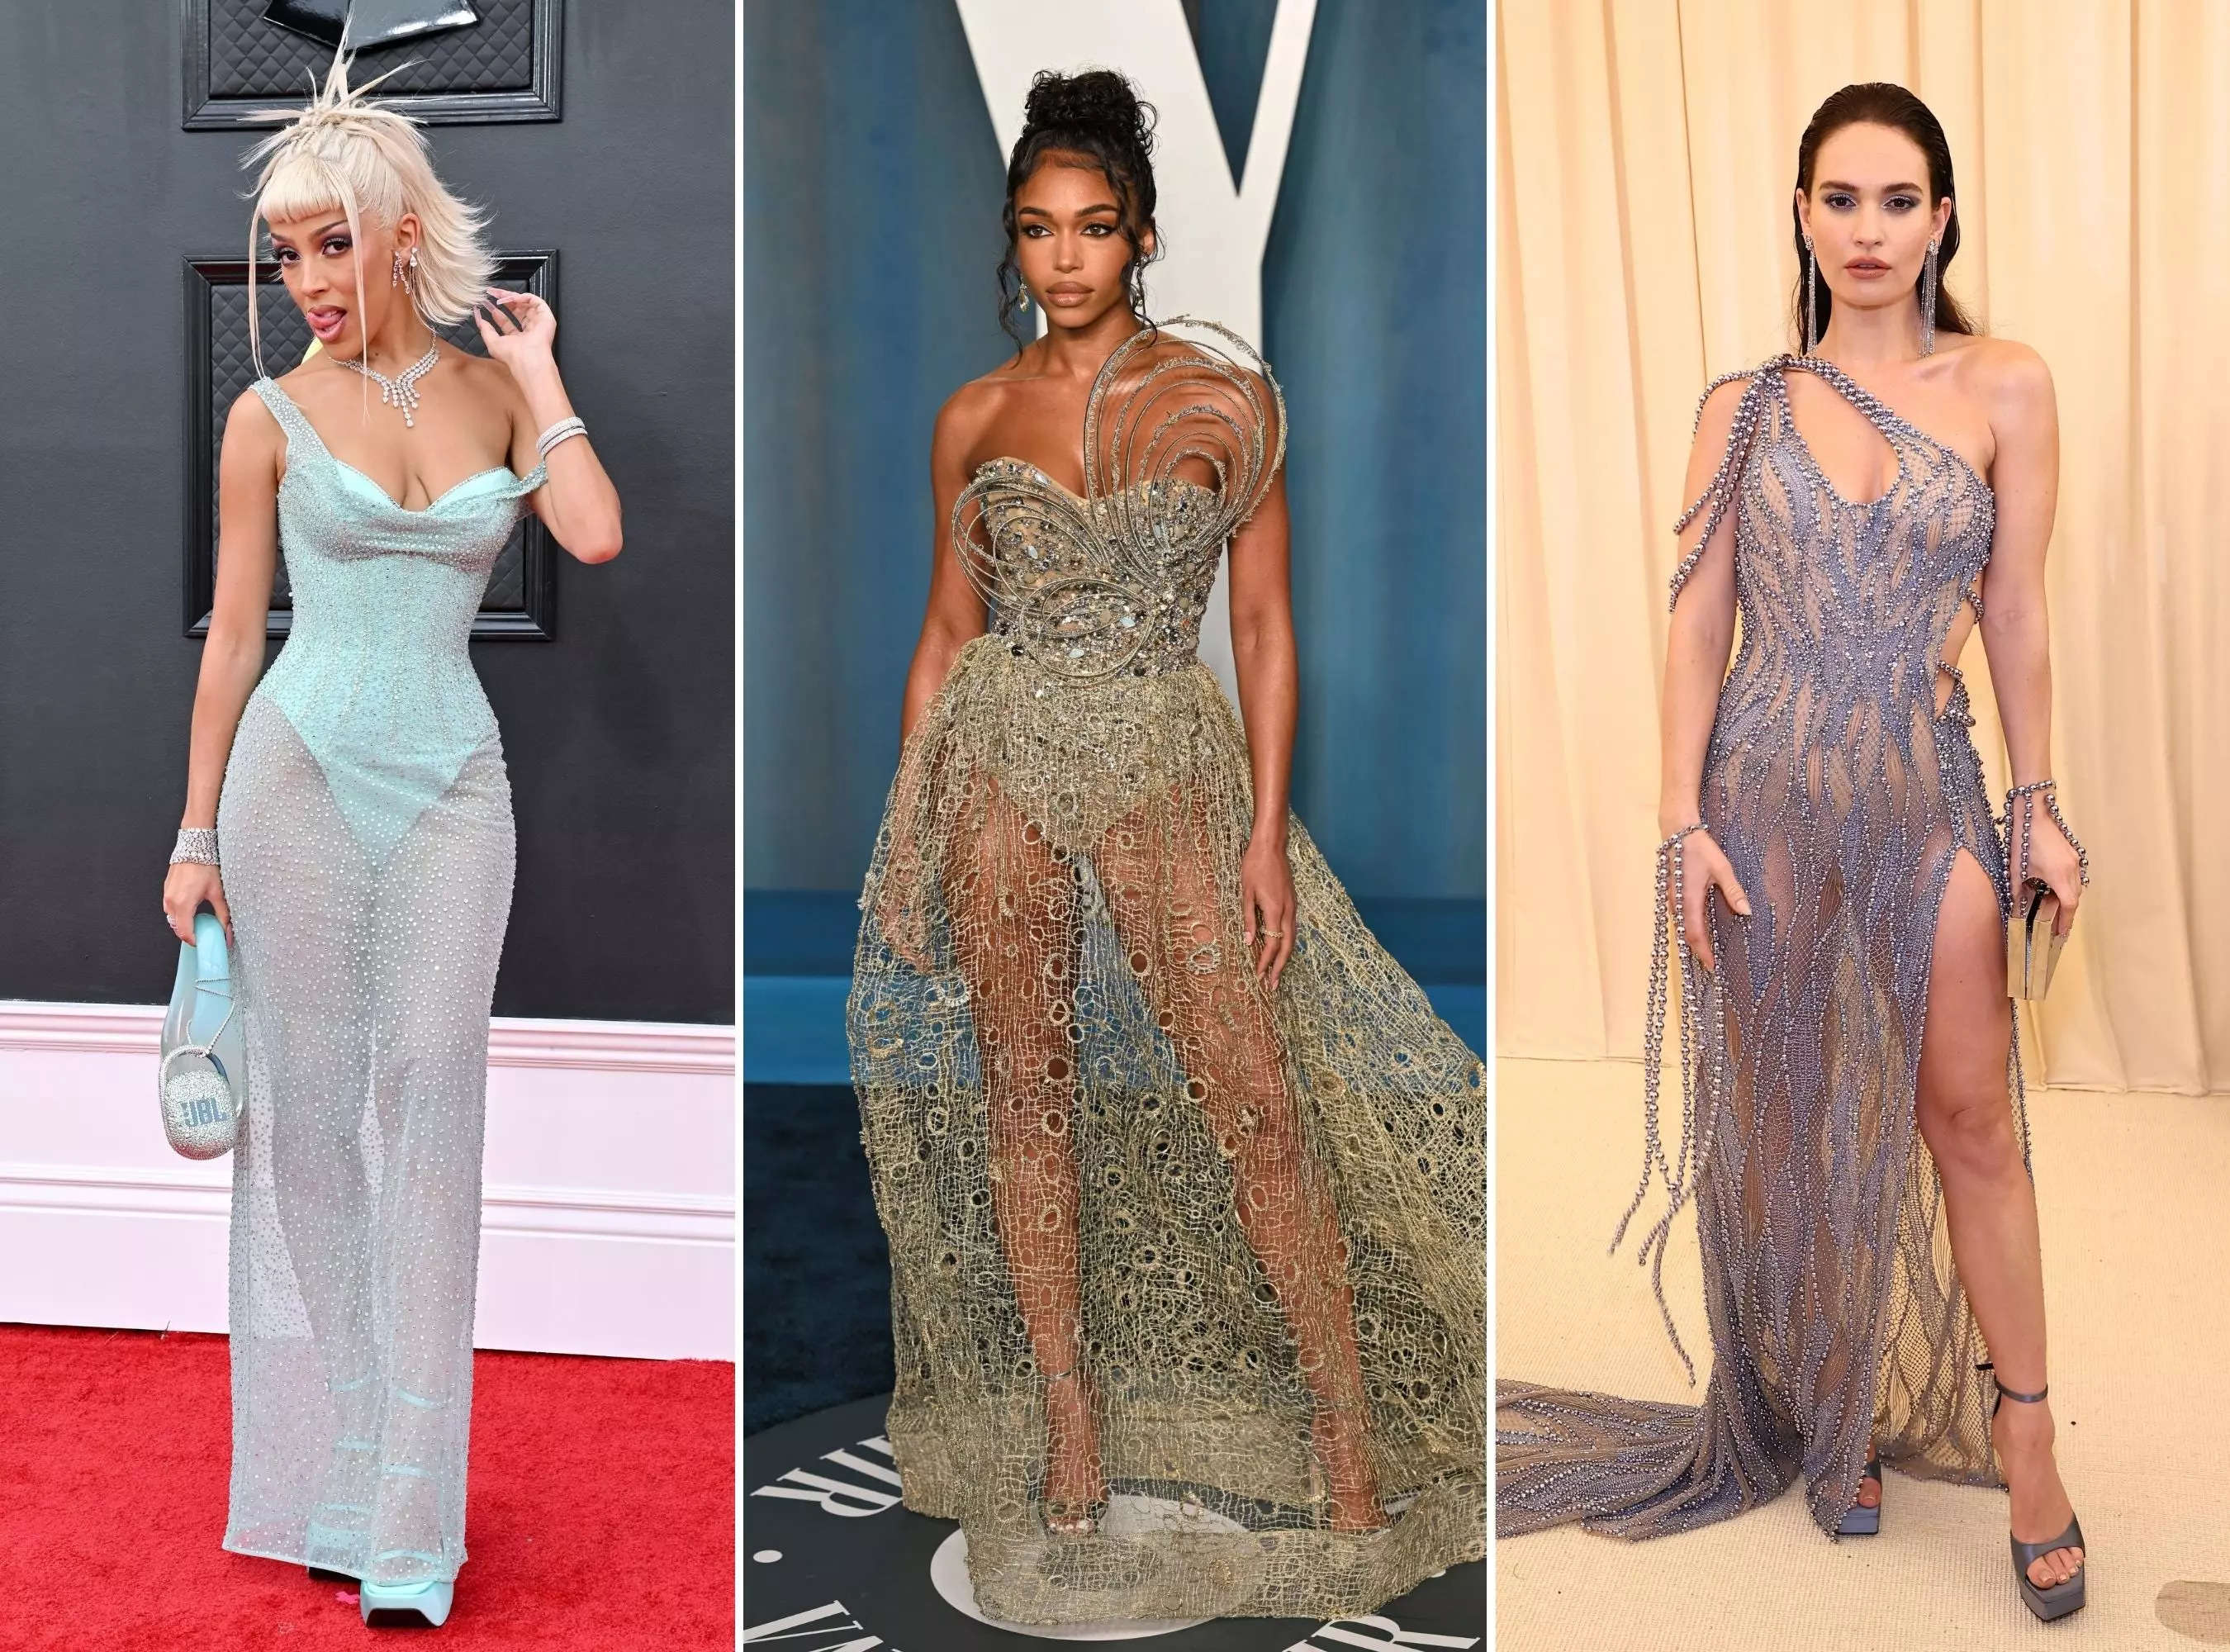 The Sheer Dress Trend Just Gave Us the Most Naked Oscars Red